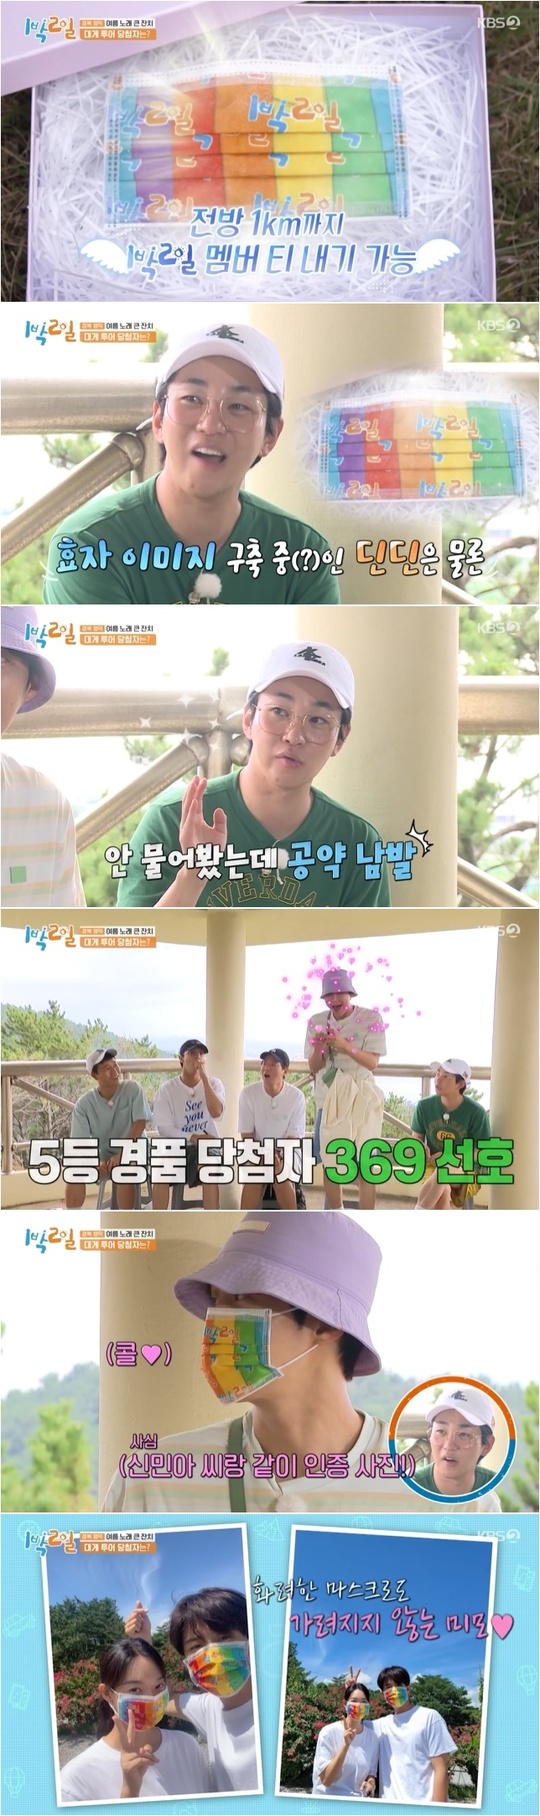 Kim Seon-ho has released a couple Mask authentication shot with Shin Min-a.KBS 2TV 2 Days & 1 Night Season 4 broadcast on September 12th usually featured members who picked prizes ahead of the end of the tour.On the day, Mask, with the logo 2 Days & 1 Night, appeared as the fifth prize, and DinDin said, I would like to give my dad that.I will wear it when I walk the Han River. DinDin also made a pledge to write me, my manager, and three stylists if I win.But the winner of the lucky (?) was Kim Seon-ho, who regretted it but asked to wear with Mr. Shin Min-a and take a photo of the certification.Kim Seon-ho is appearing on Shin Min-a and TVN Gang Village Cha Cha Cha.